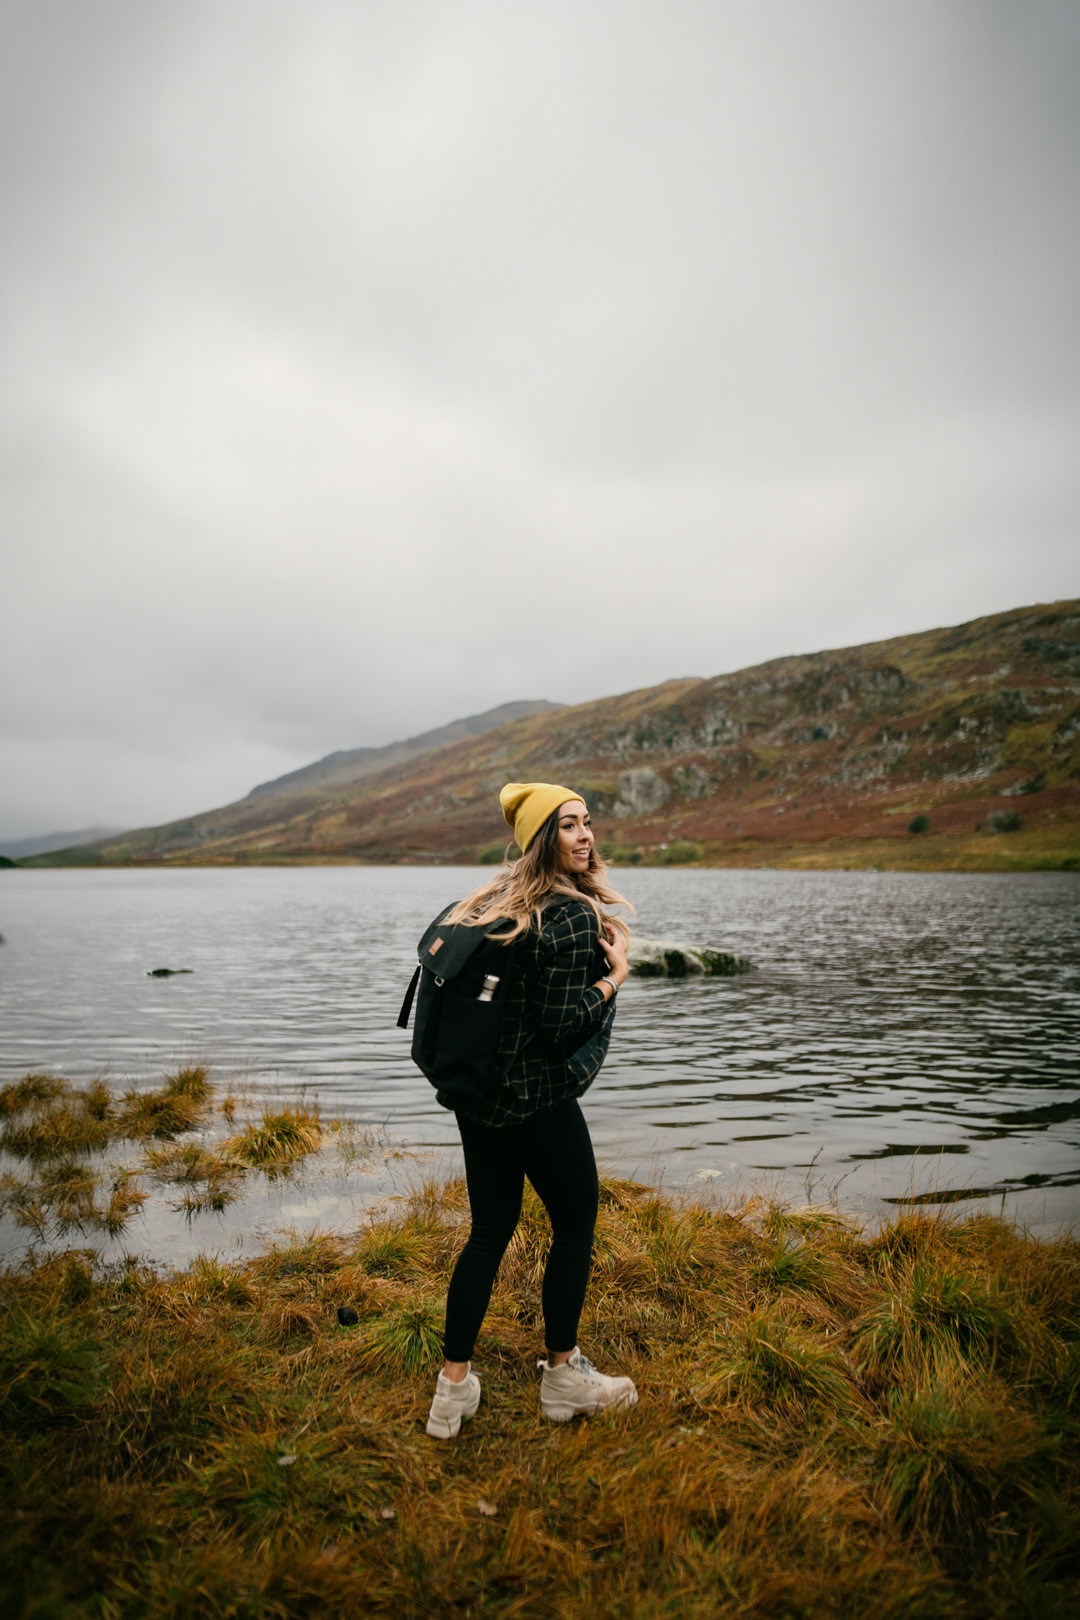 girl waring yellow beanie hat stood next to lake during cloudy day